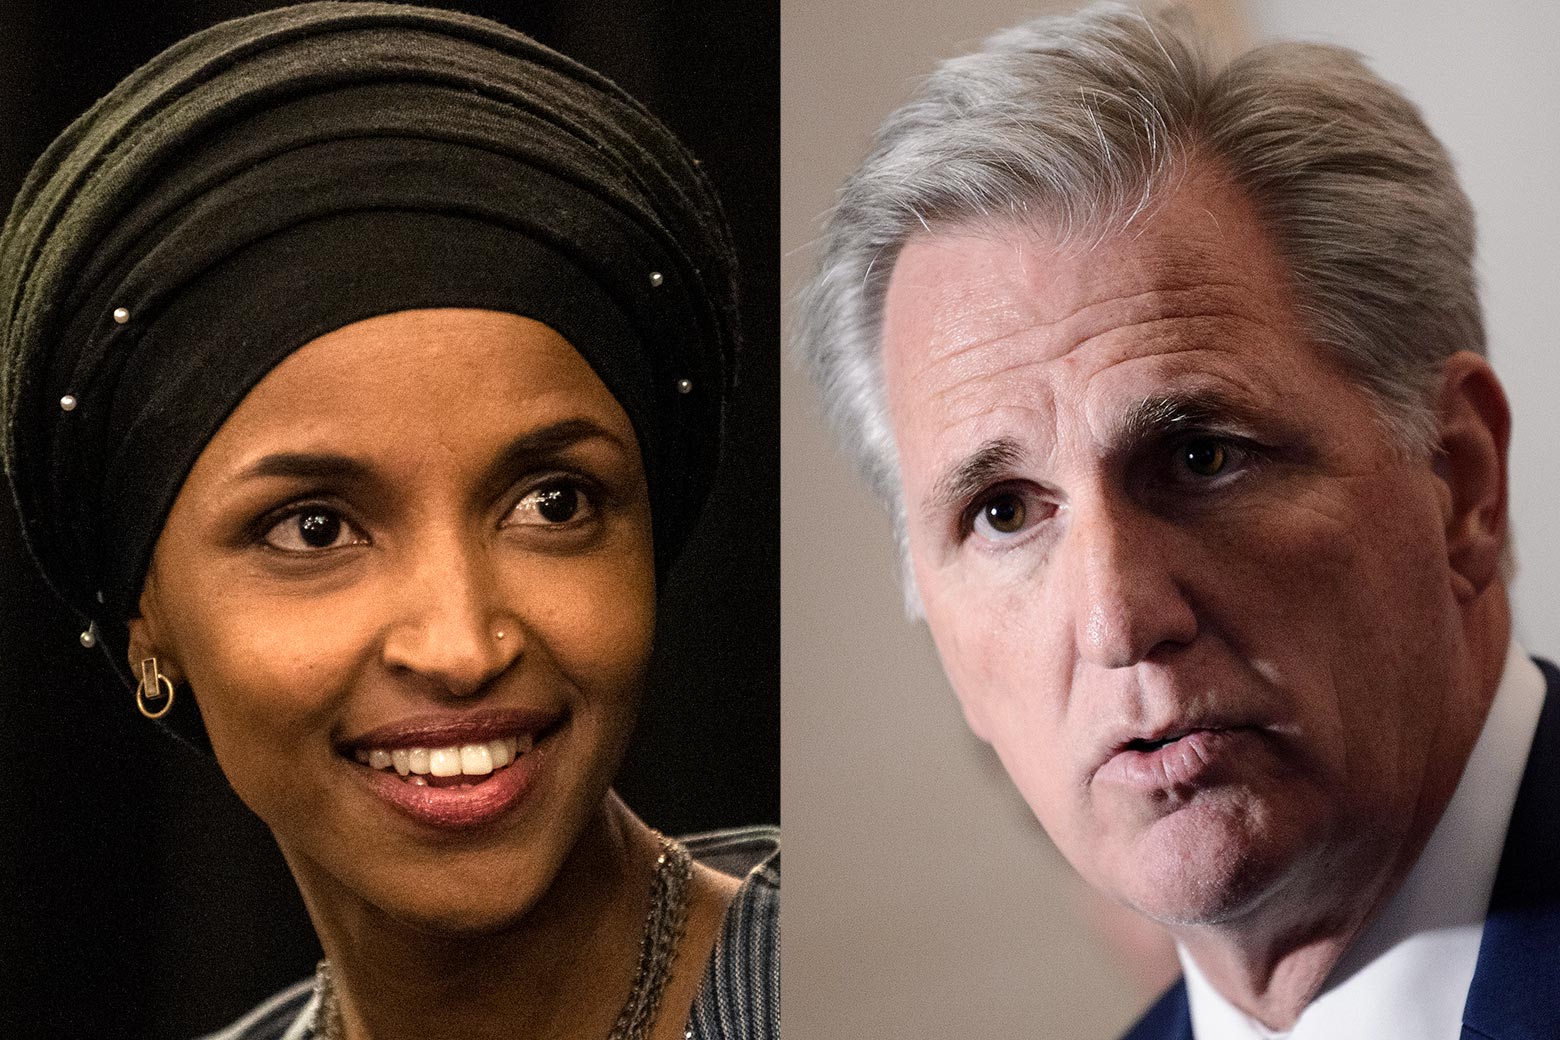 Minnesota Rep. Ilhan Omar and House Minority Leader Kevin McCarthy.